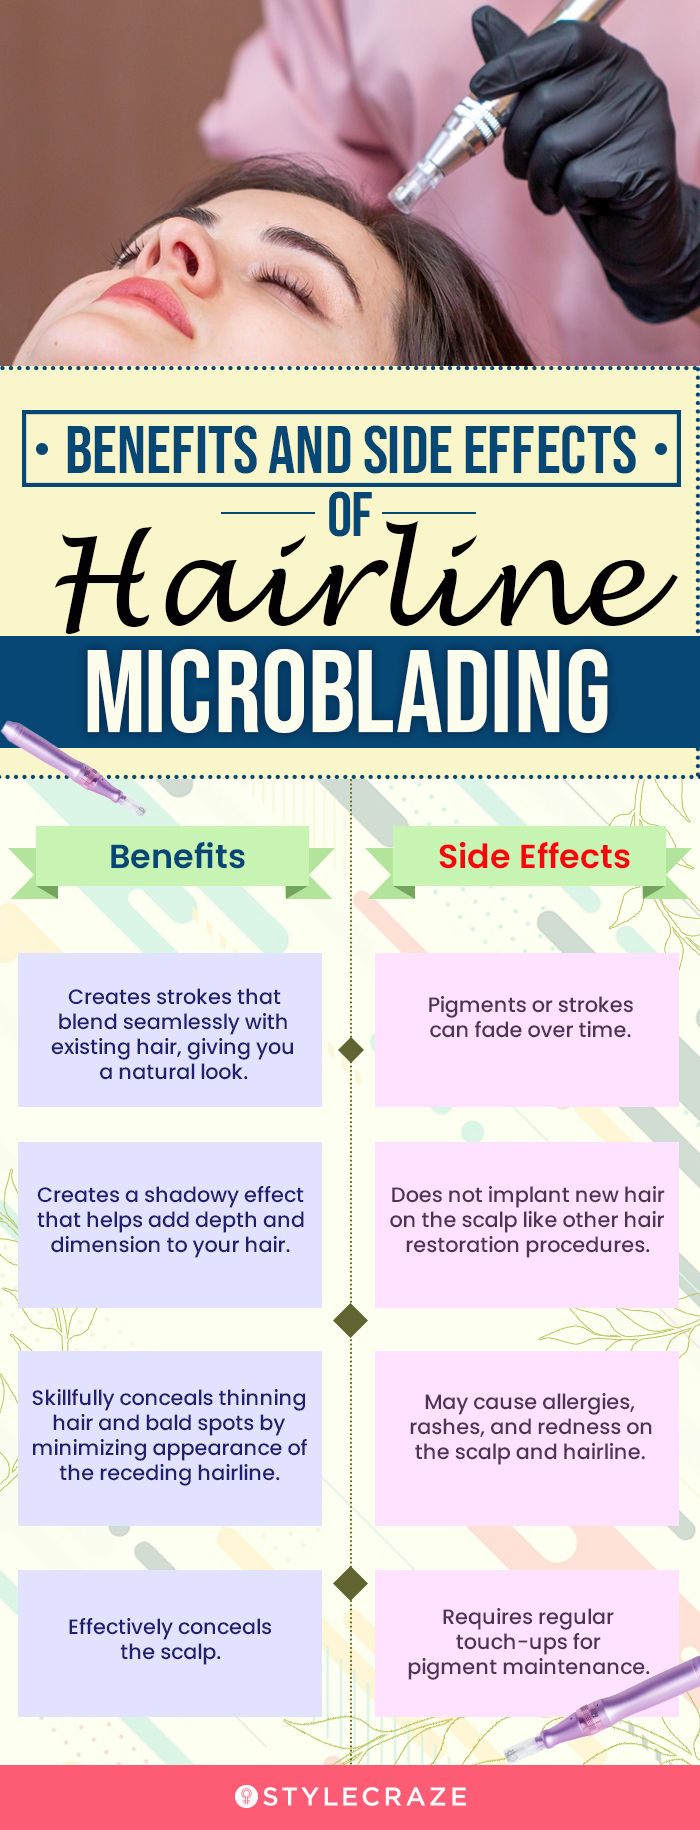 benefits and side effects of microblading hairline (infographic)